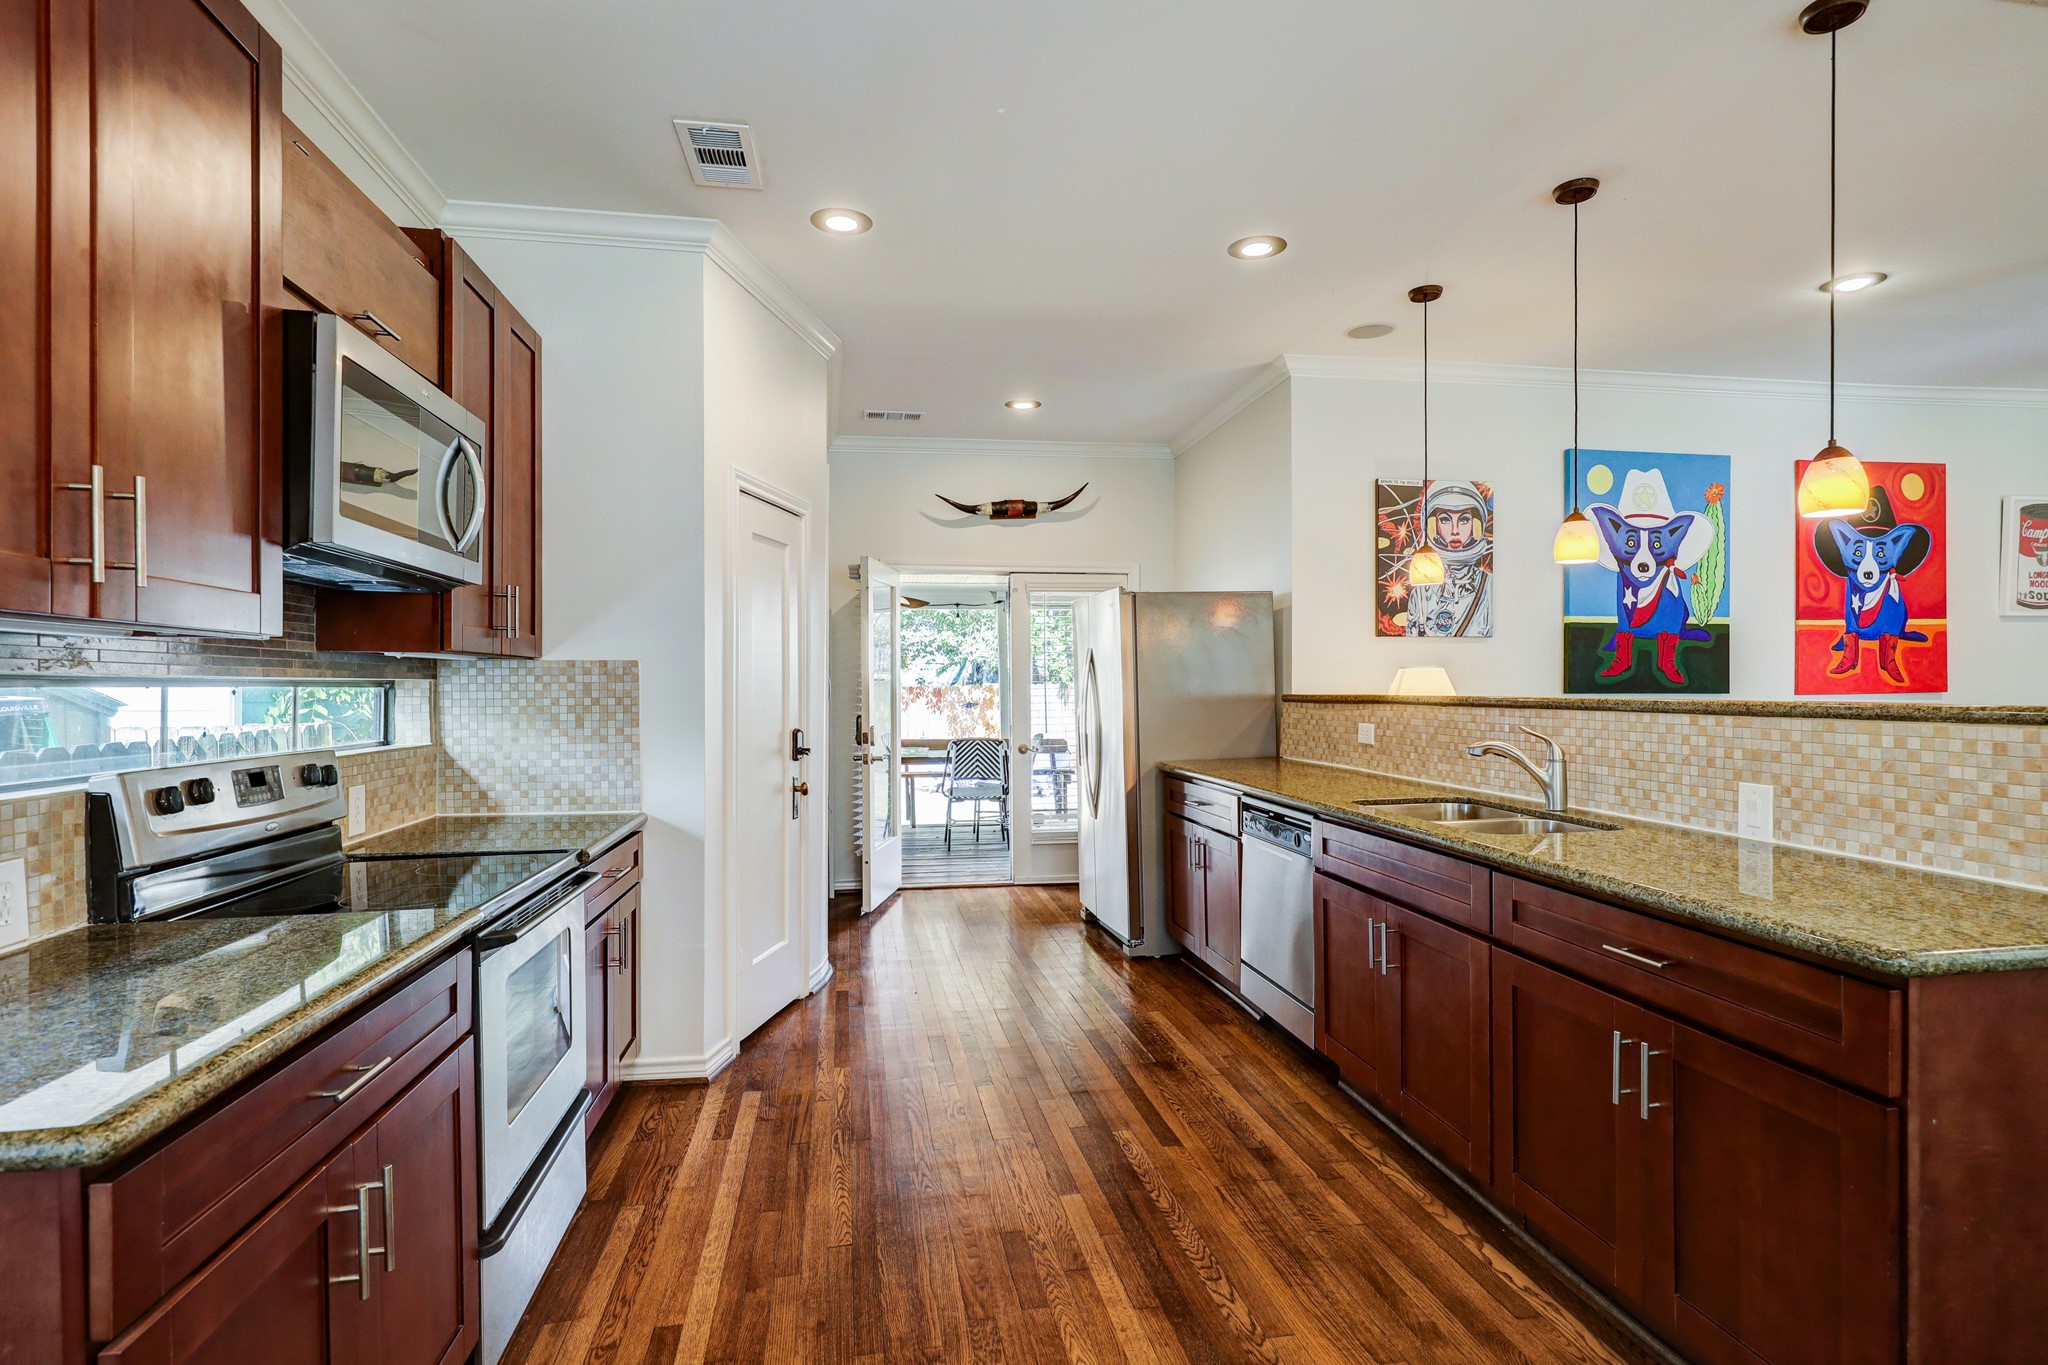 The large kitchen is open to the family room and allows convenient access for entertaining indoors or out.